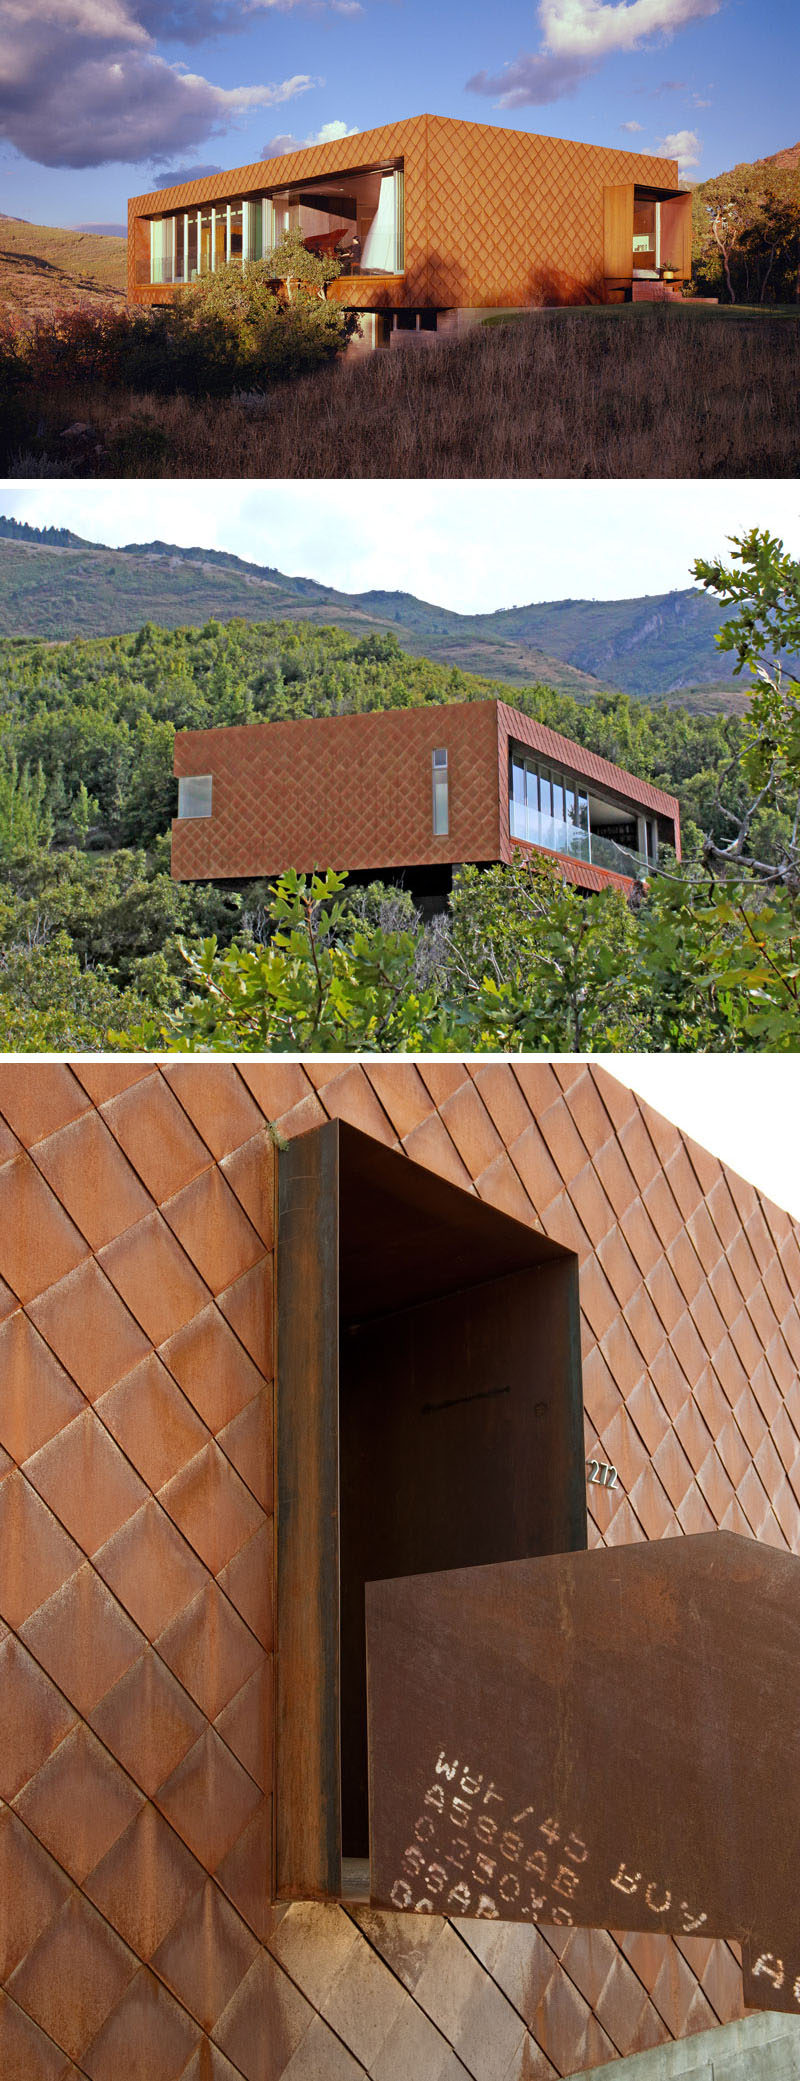 Weathering steel shingles on the exterior of this modern house it give it a textured look that resembles scales on a reptile.